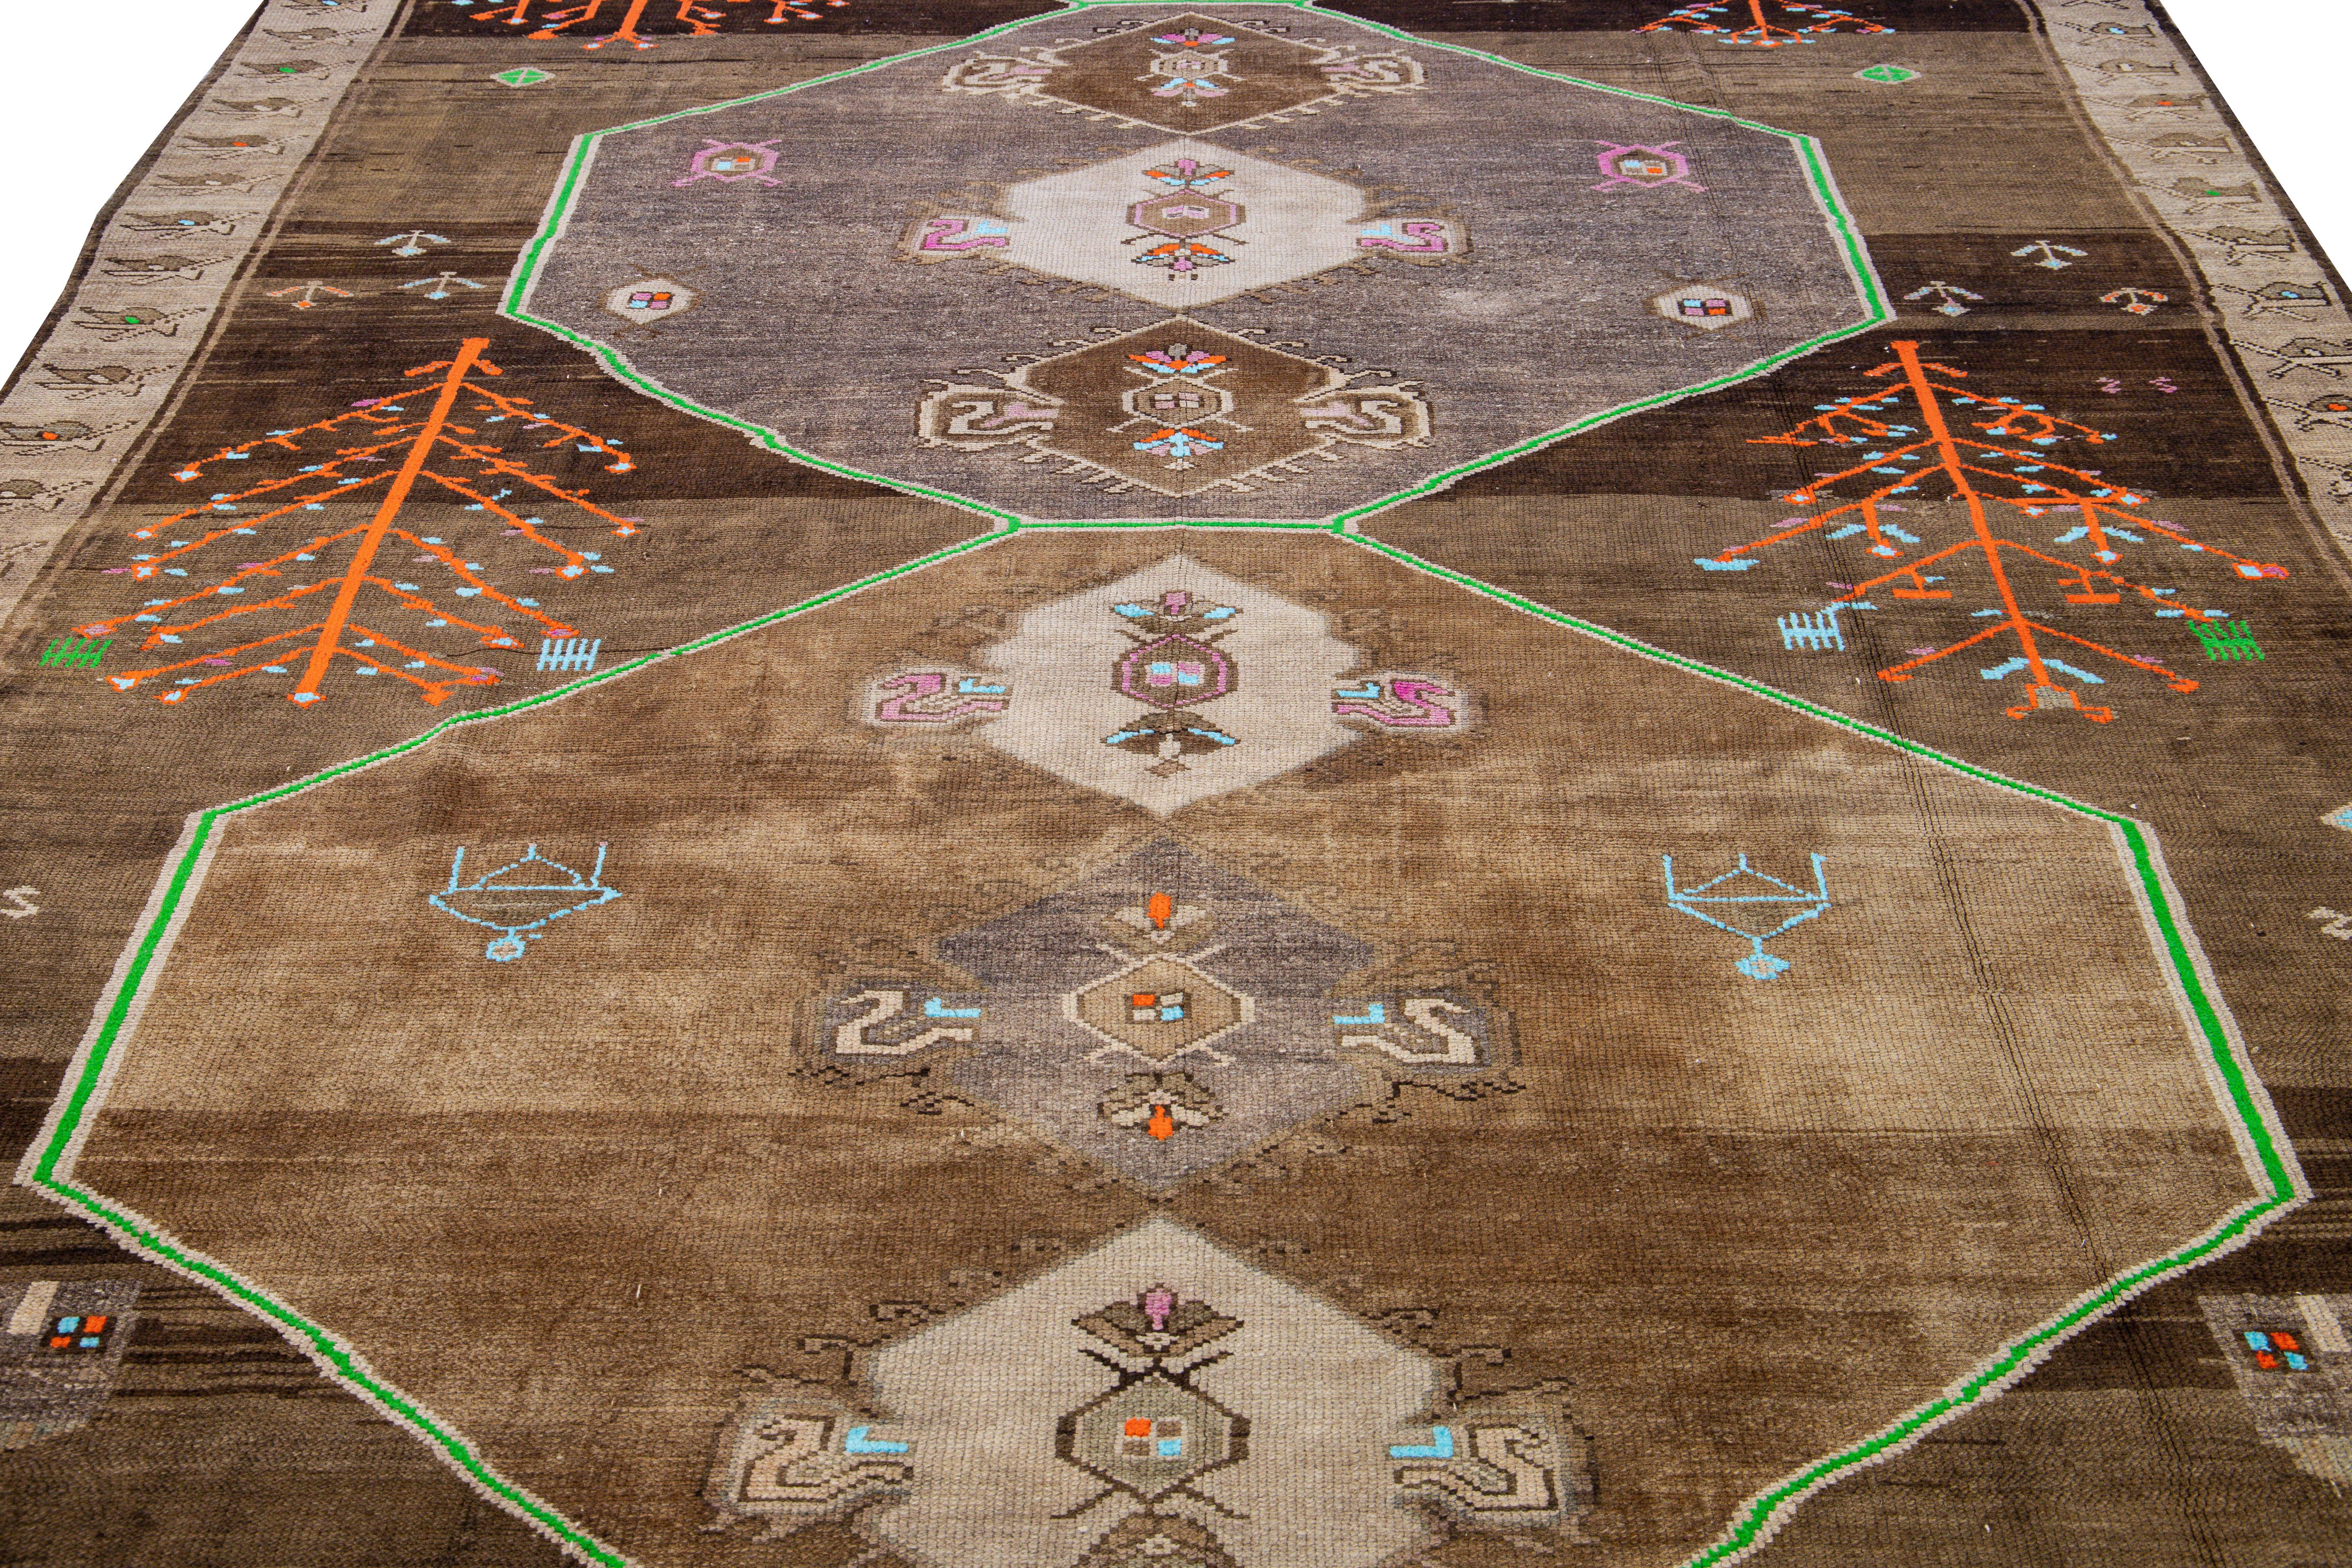 Beautiful vintage Turkish Kars hand-knotted wool rug with a brown field. This Turkish rug has green, orange, blue, and pink accents in a gorgeous all-over geometric Tribal design.

This rug measures: 8' x 13'1